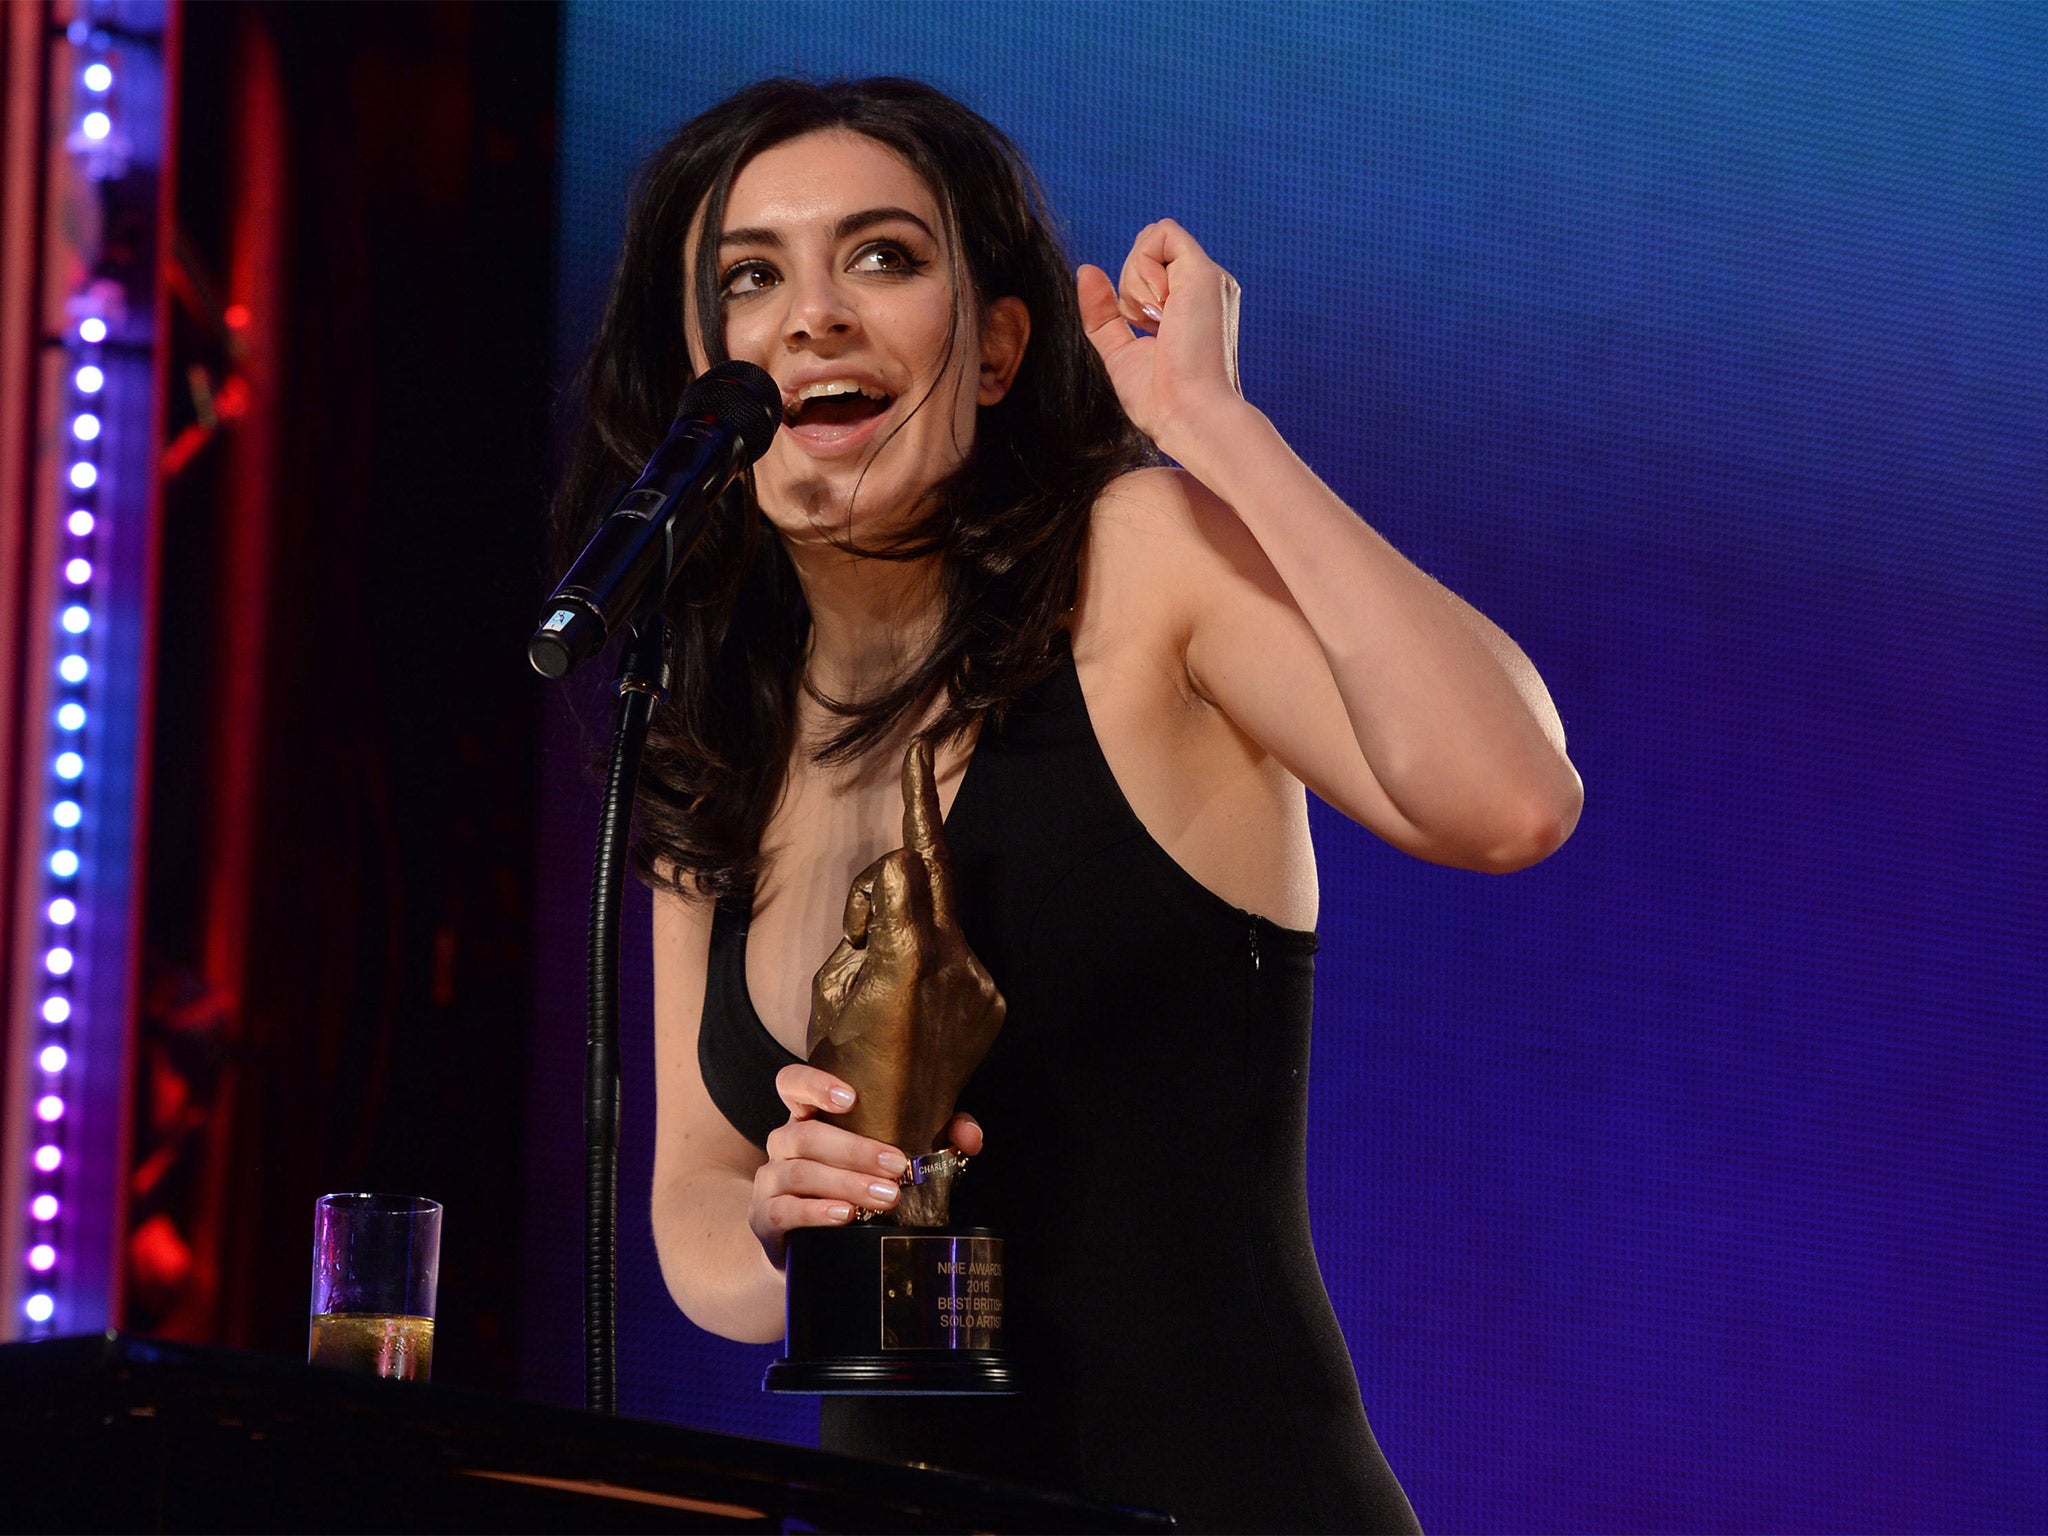 Charli XCX was named Best British Solo artist